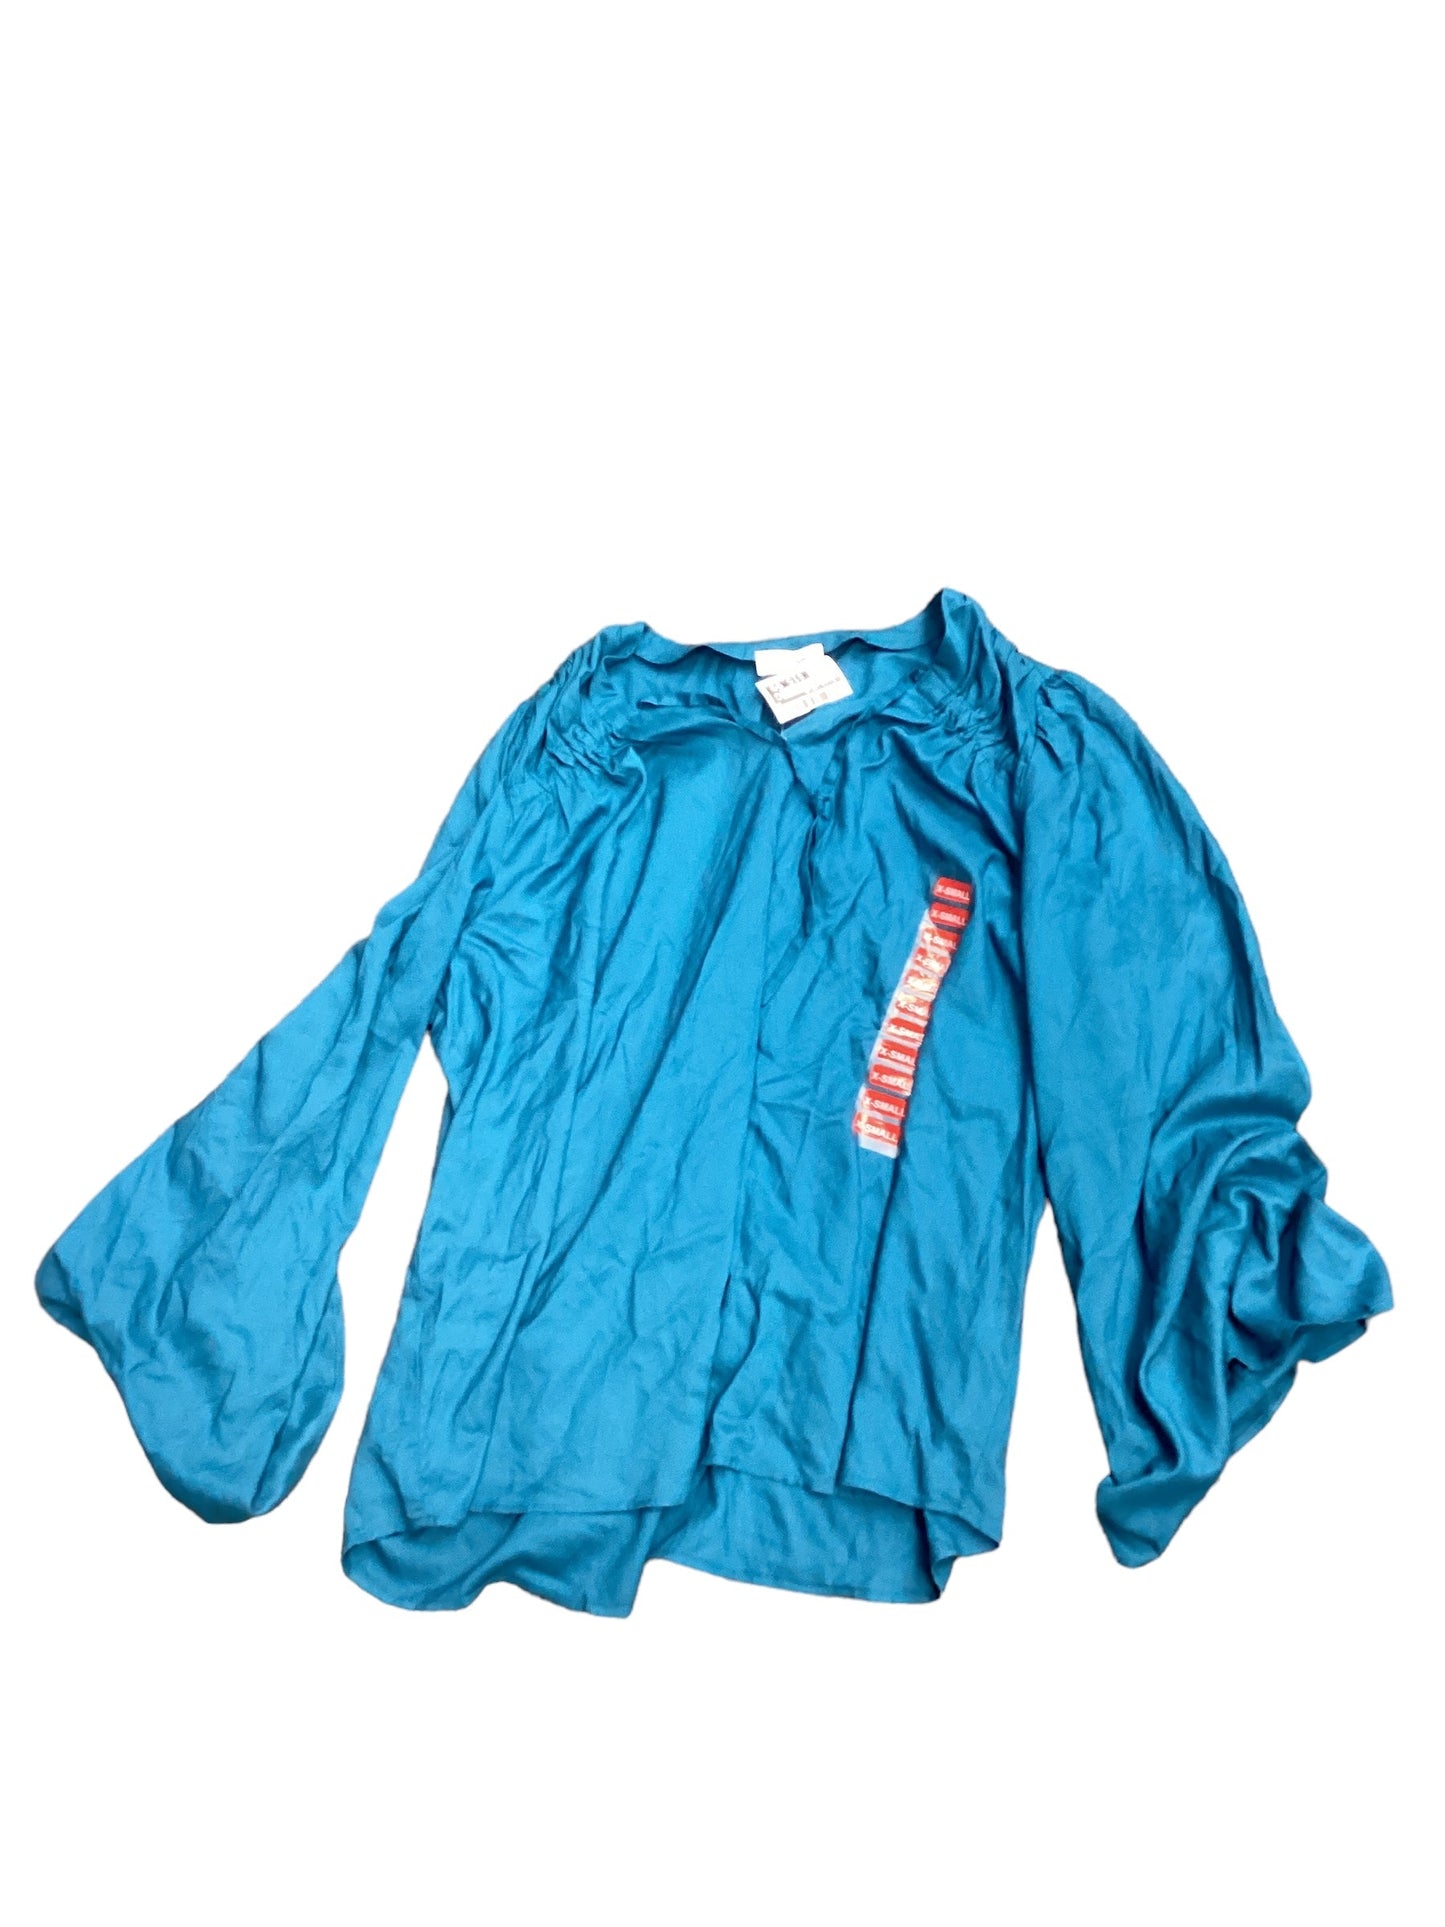 Blue Top Long Sleeve Jessica Simpson, Size Xs